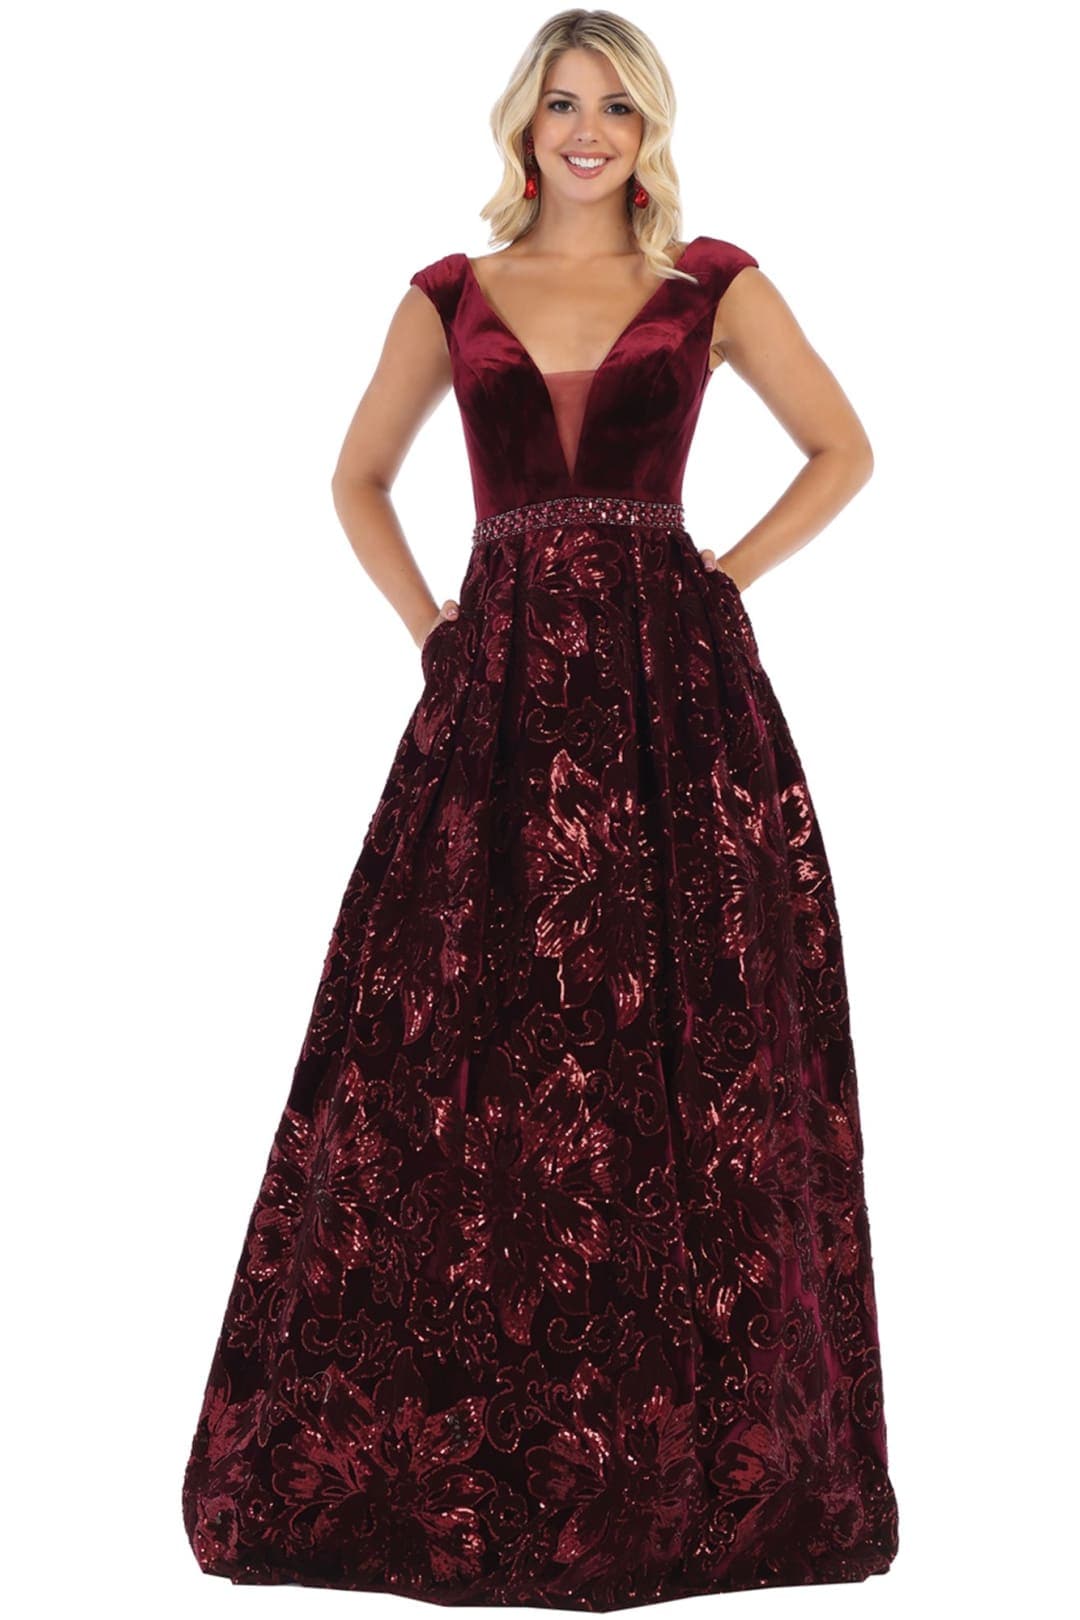 Formal Special Occasion Dress - Burgundy / 6